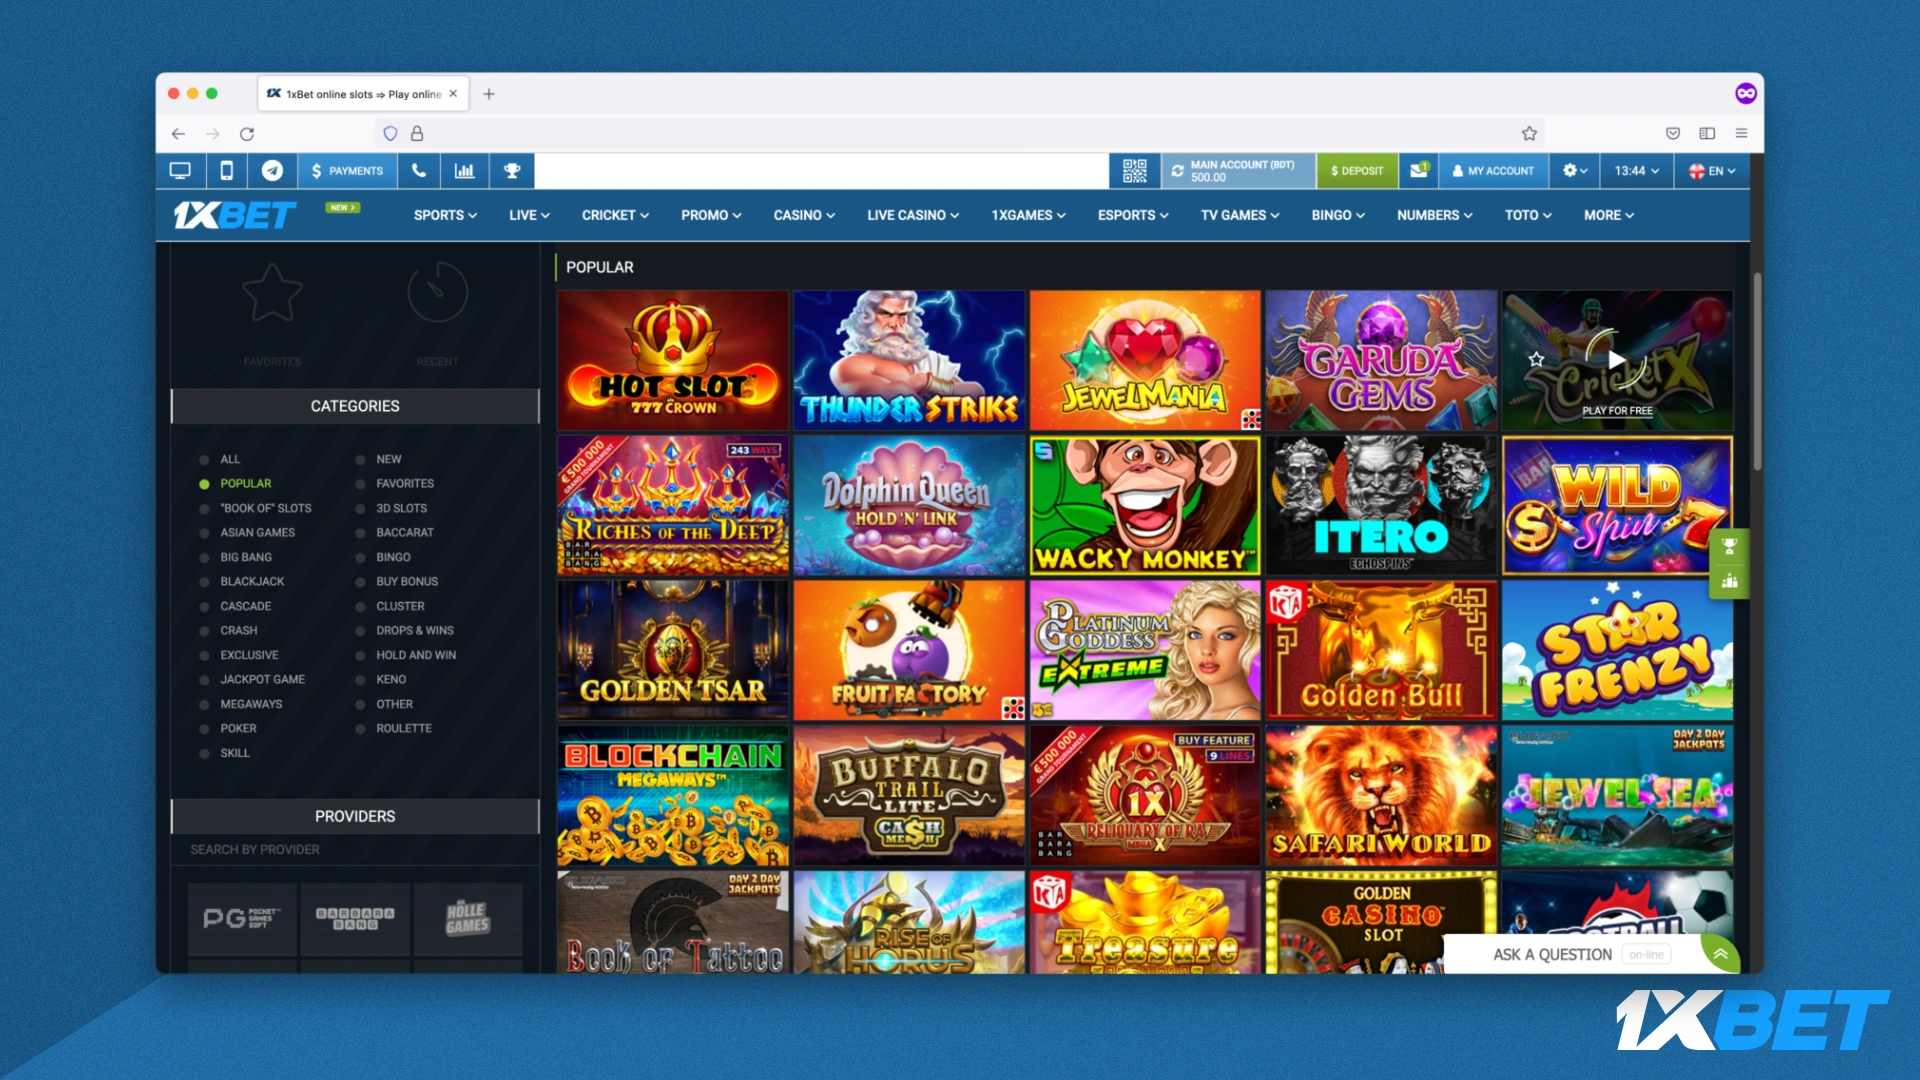 The most popular casino games in 1xbet Bangladesh